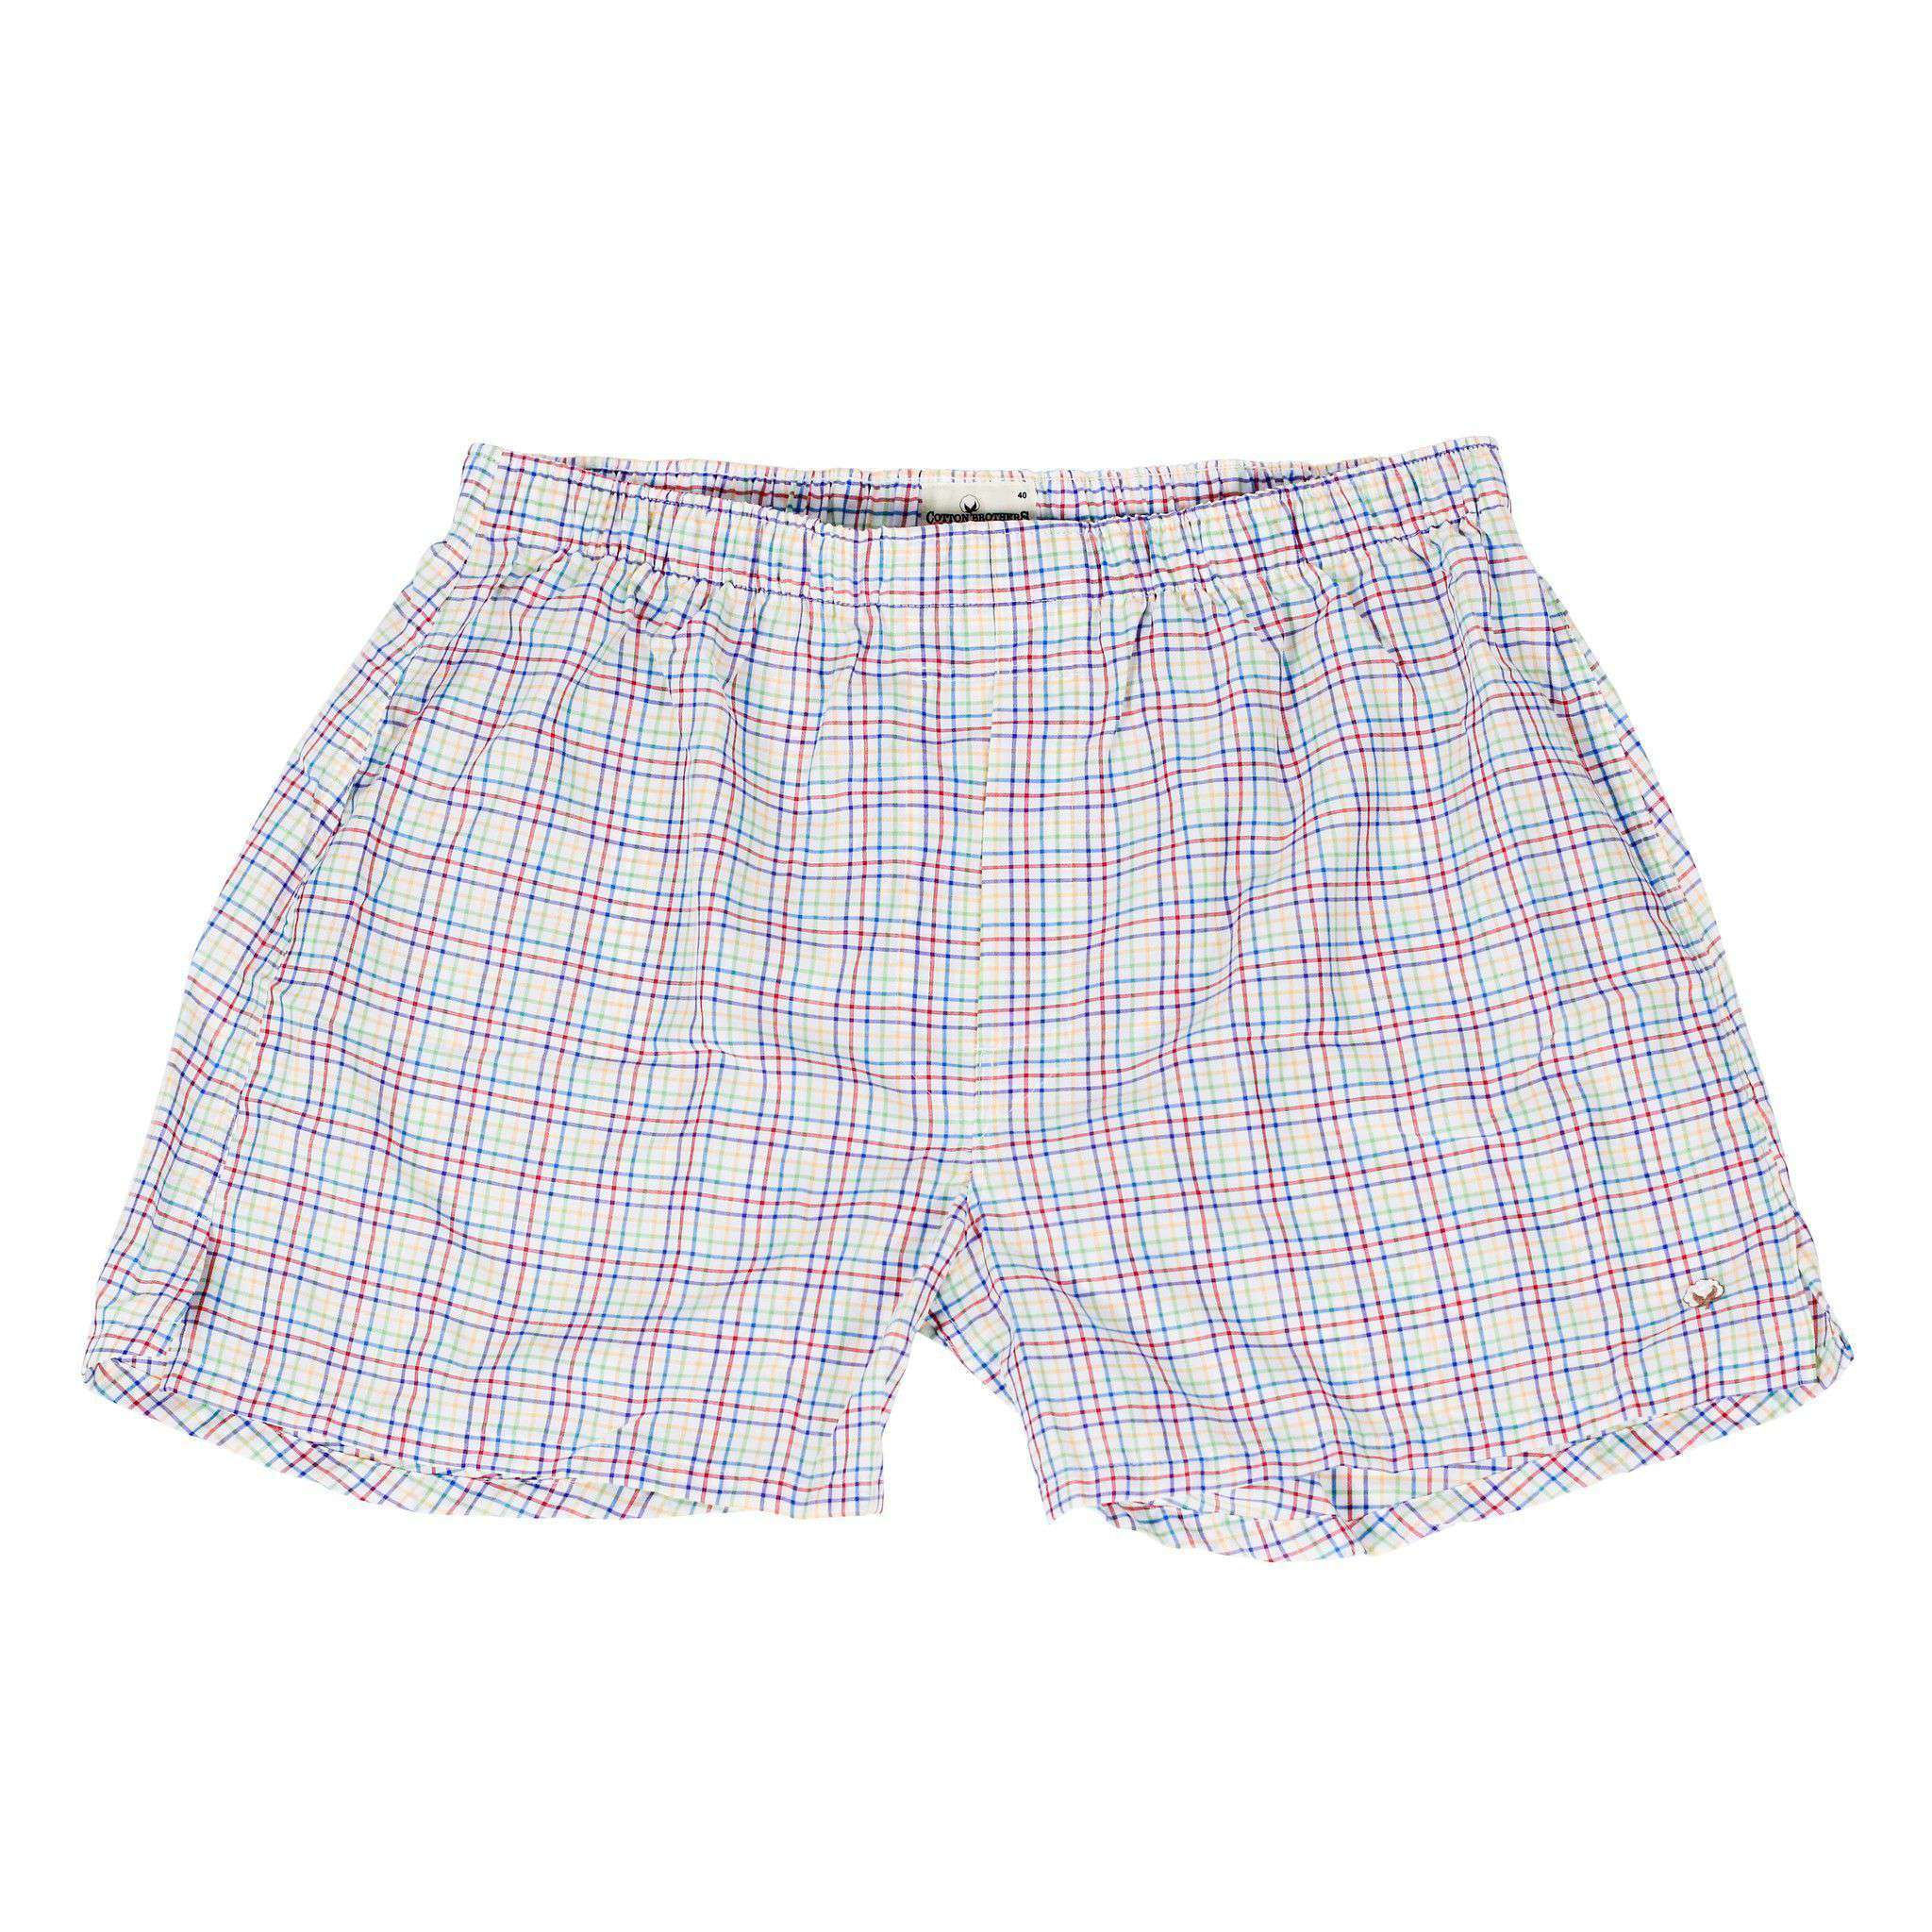 Cotton Brothers Boxer Twin Set in Blue and White Multi Check